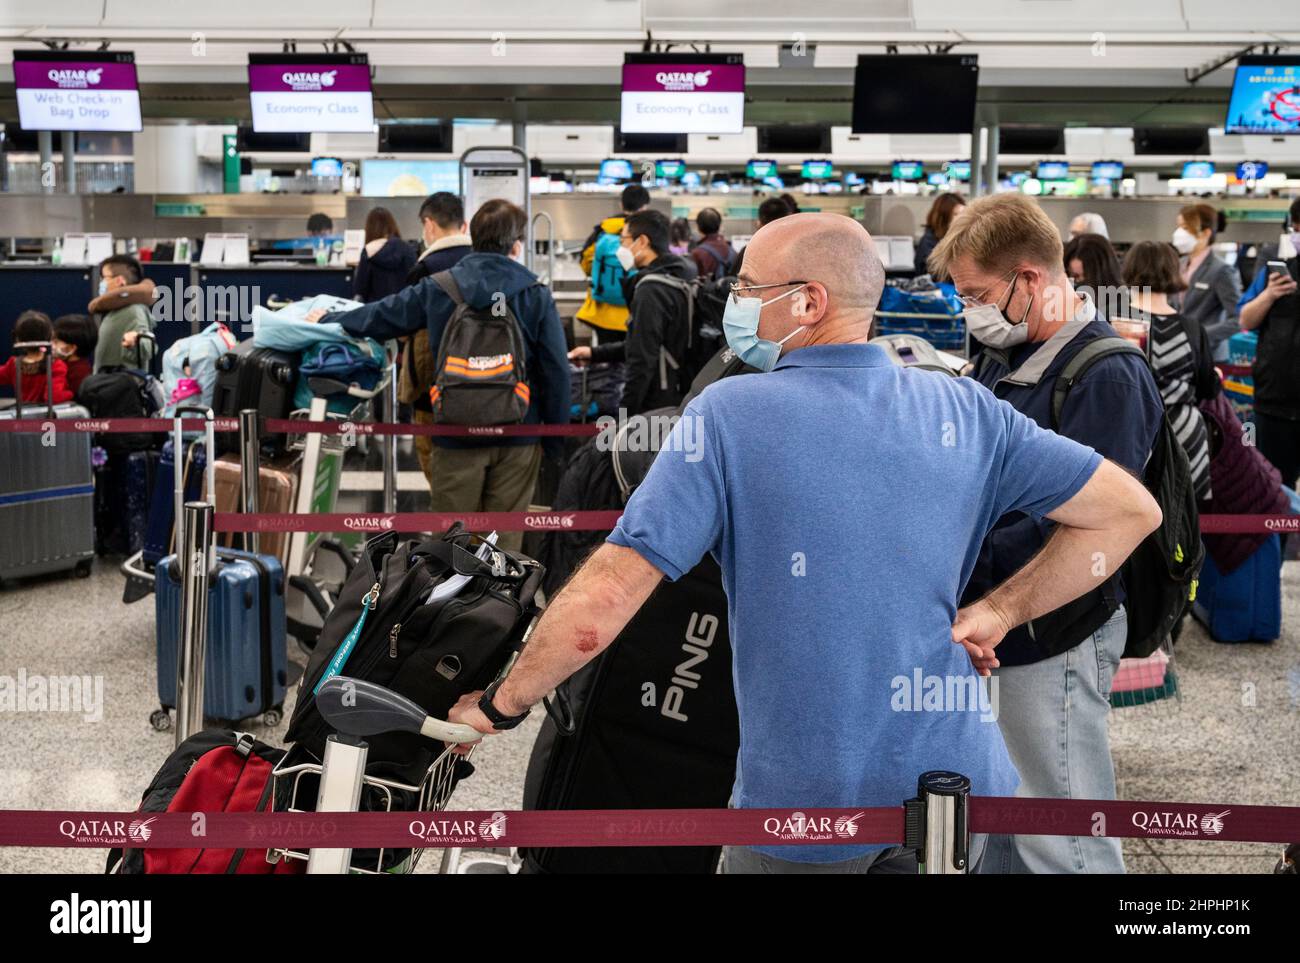 Hong Kong, China. 21st Feb, 2022. Passengers wait in a line for Qatar  Airways airline check-in counter at Hong Kong's Chek Lap Kok International  Airport. Hong Kong is notoriously known for having